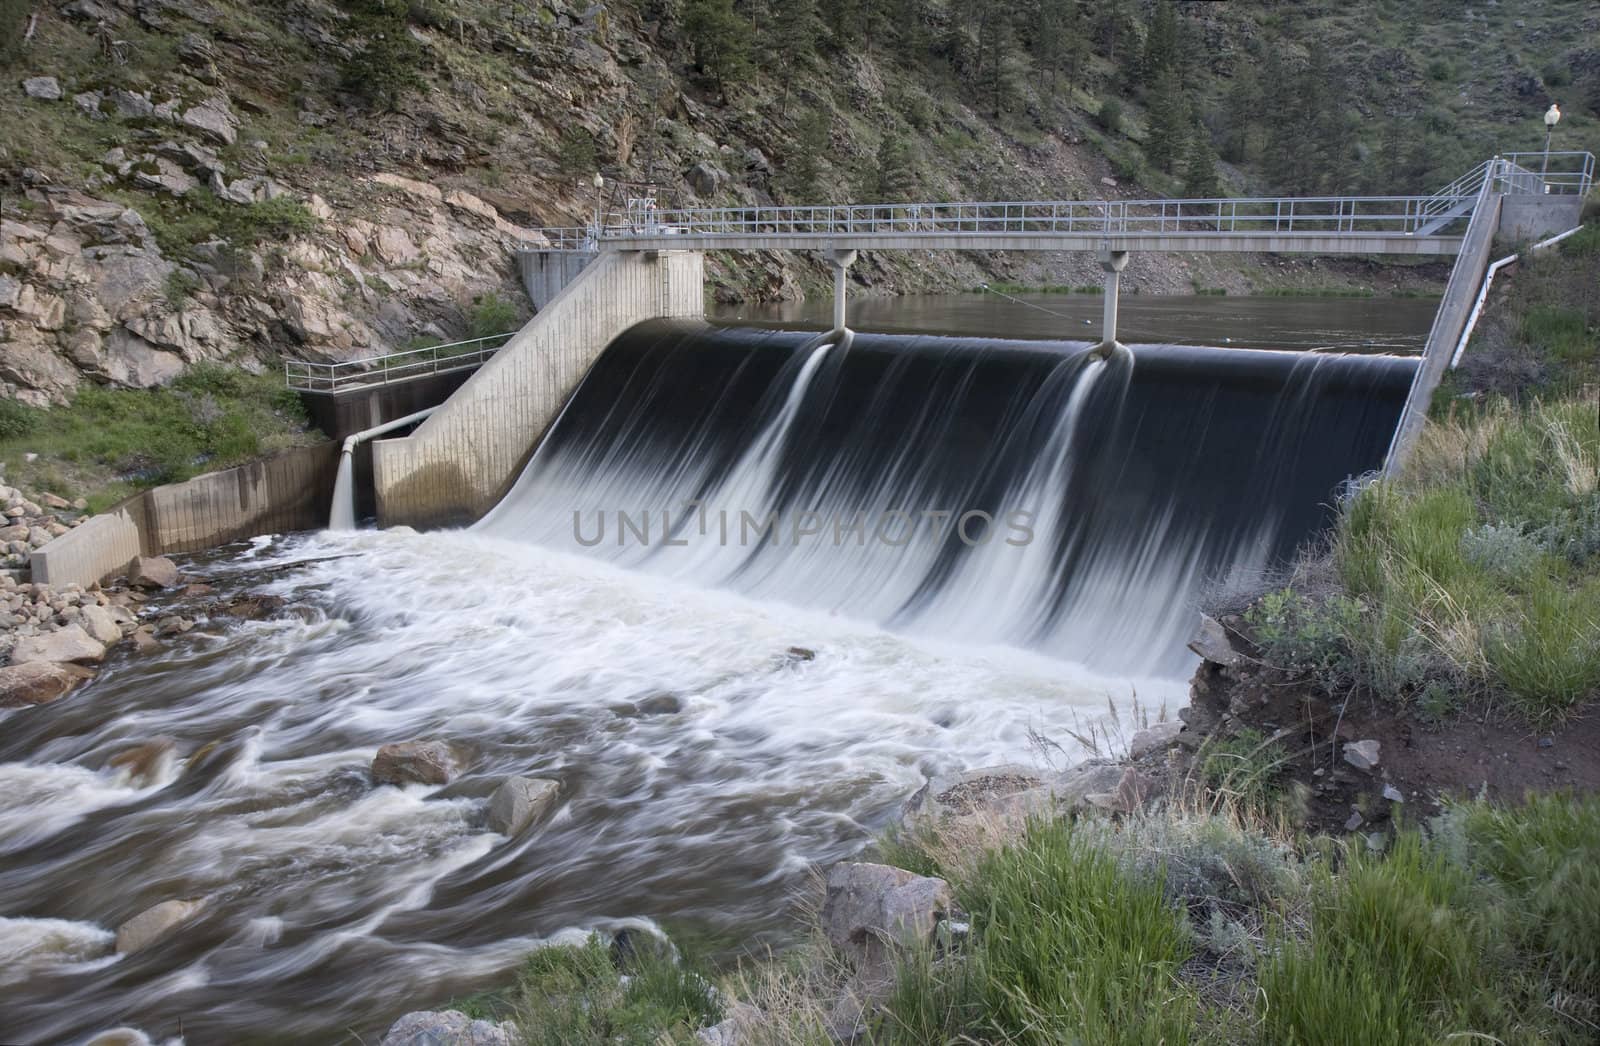 Idylwilde, a concrete, gravity dam on Big Thompson River, Colorado, used hydroelectic power purposes